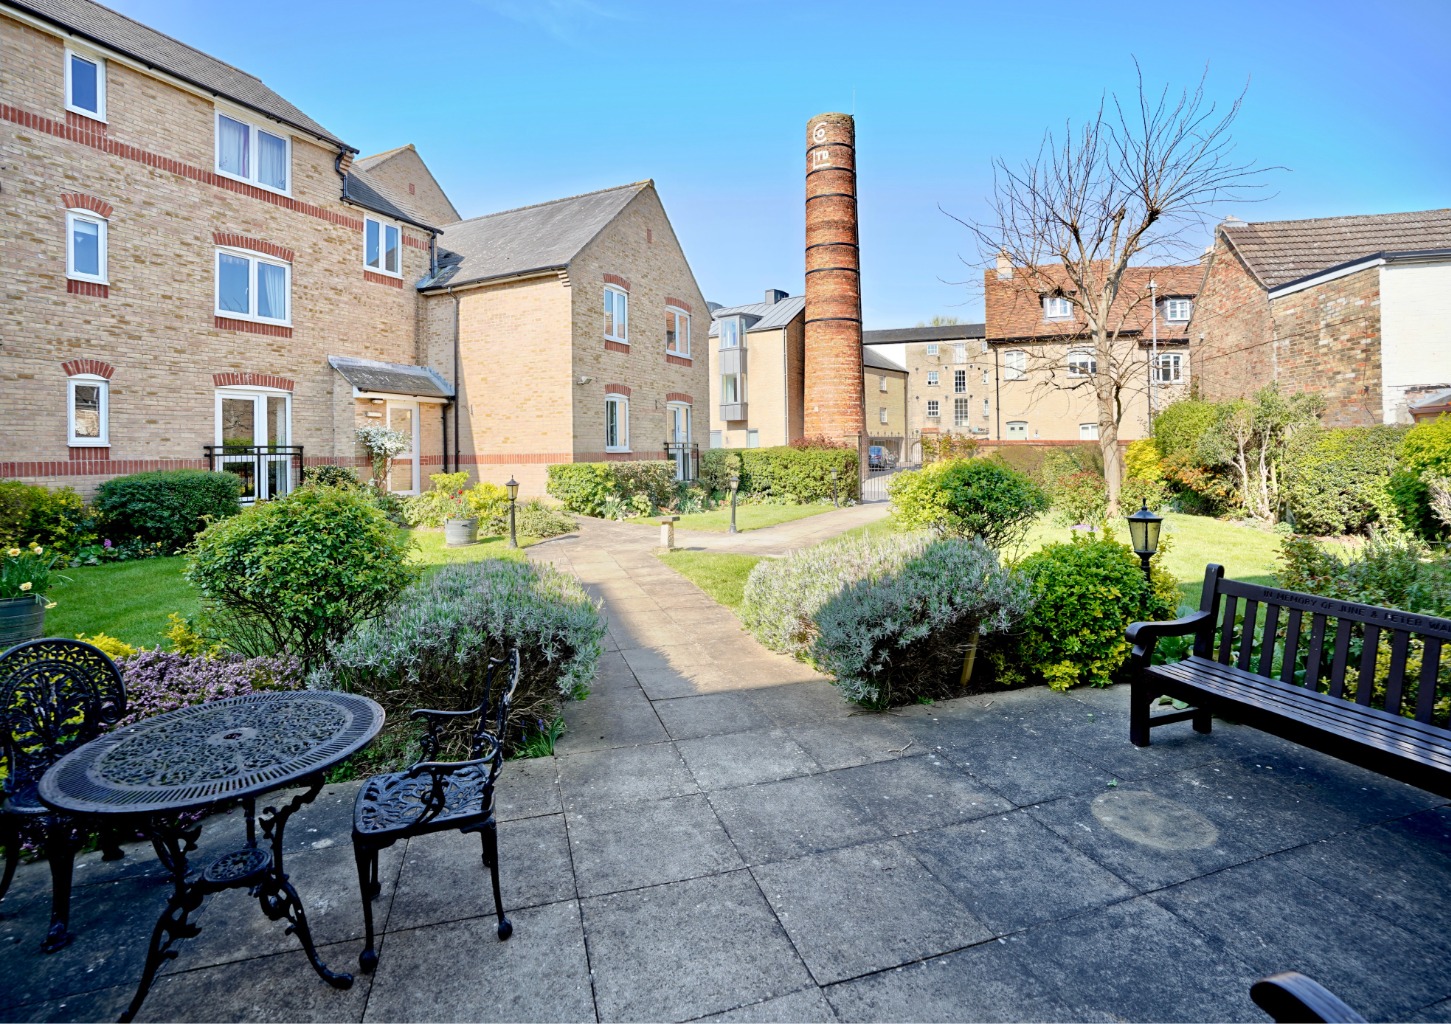 1 bed flat for sale in Church Street, St. Neots - Property Image 1